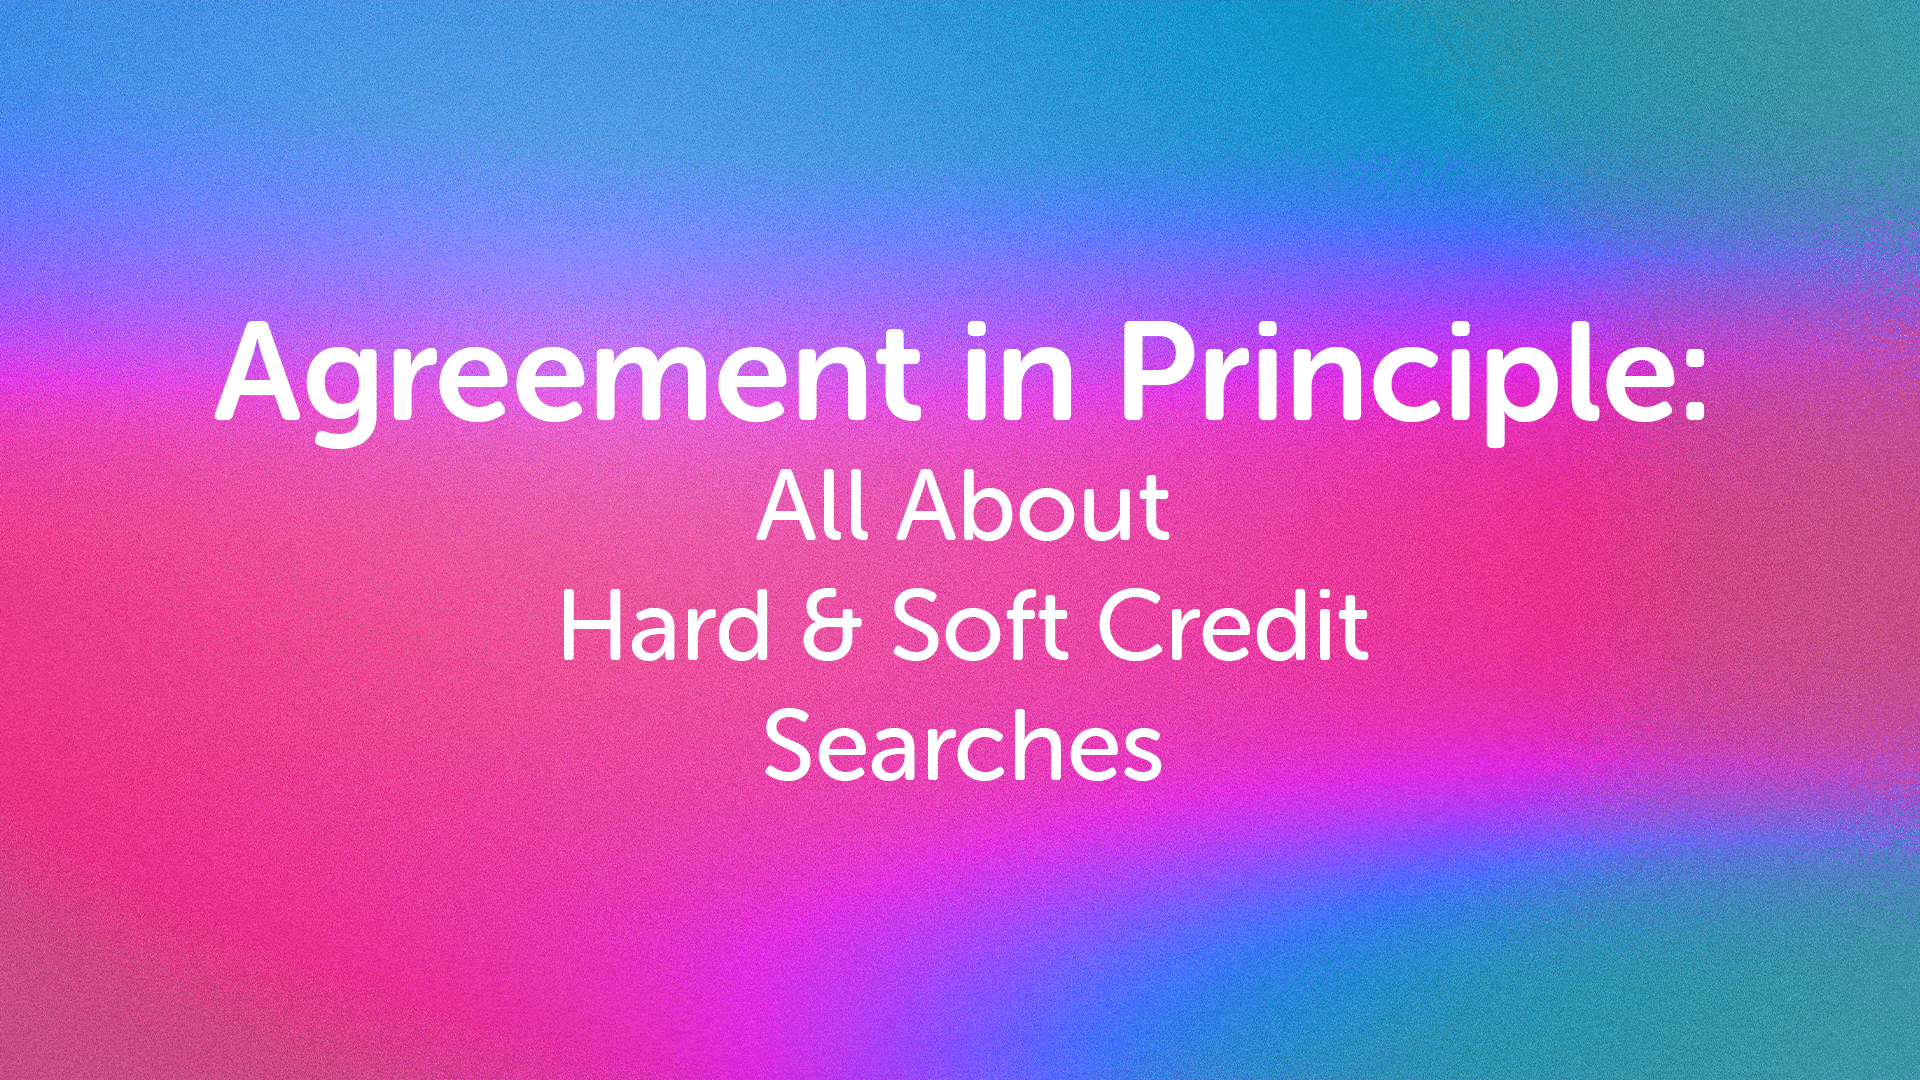 AIP - Hard and Soft Credit Searches